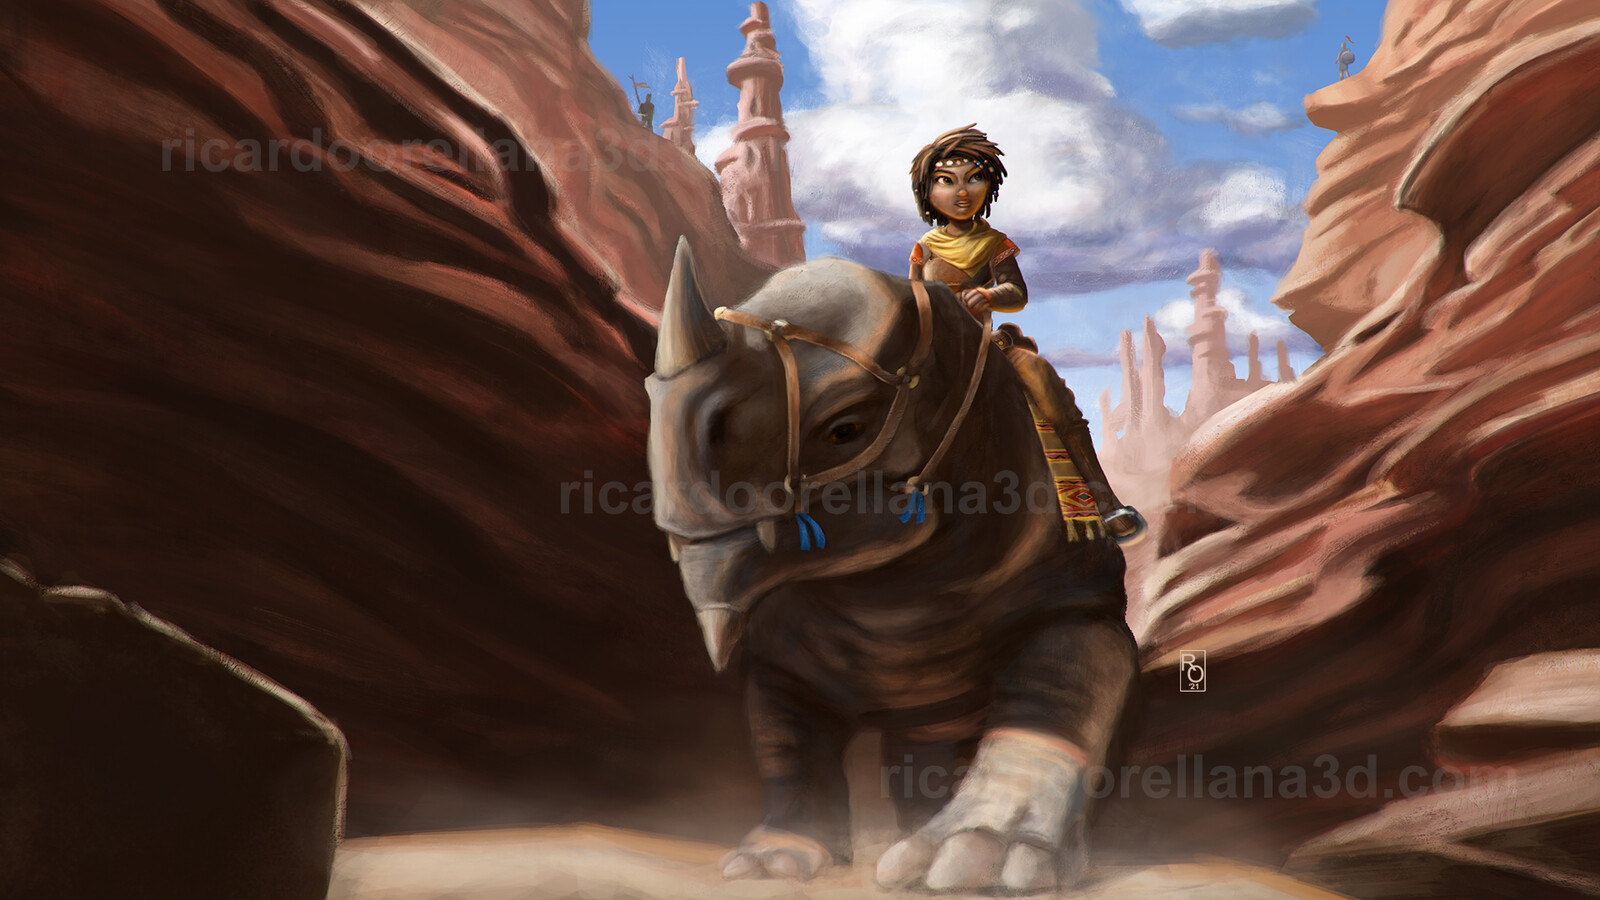 The original prompt: "A nomad traveler, mounted on her beast, is crossing an uncharted canyon but is aware she's being watched." 
